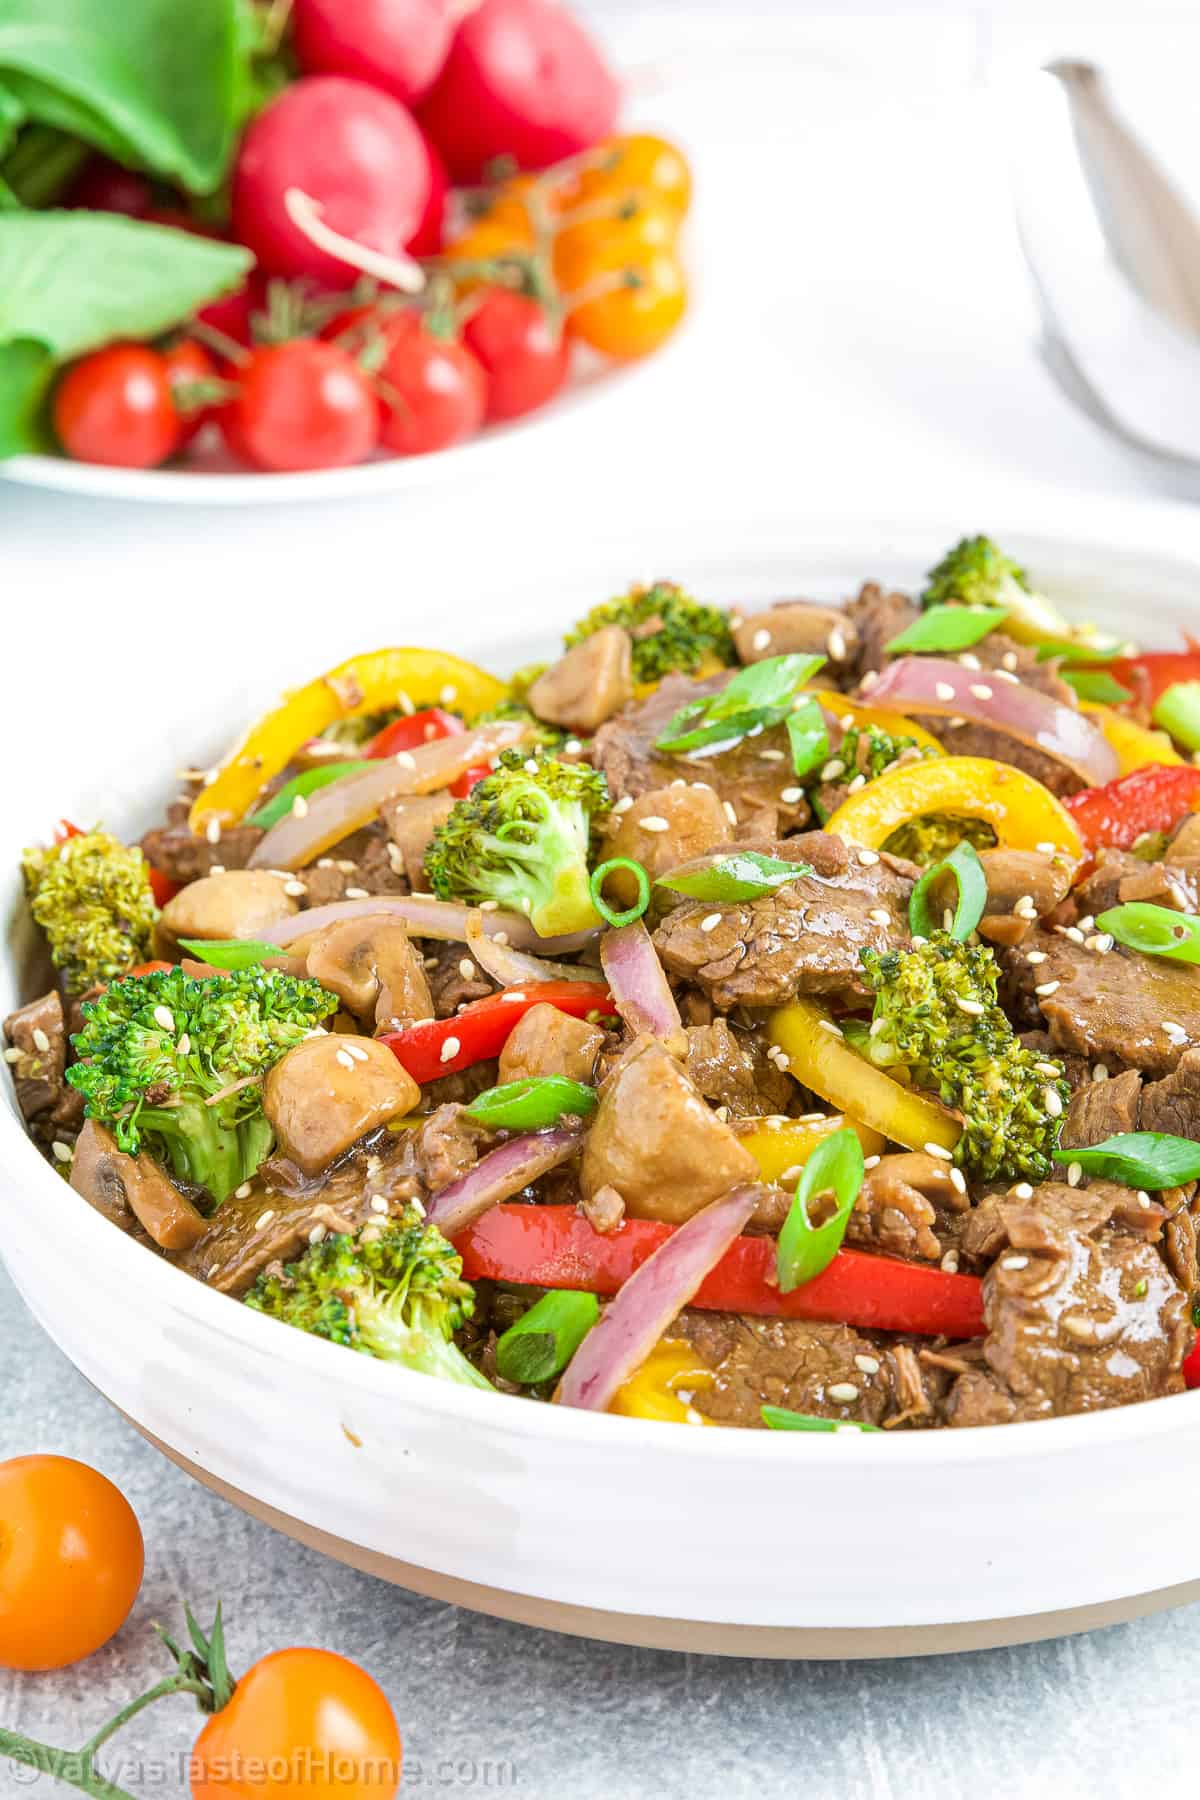 This recipe is not only mouthwateringly delicious, but it also utilizes a medley of fresh veggies and tender flank steak, all tossed in a homemade, flavor-packed stir fry sauce.